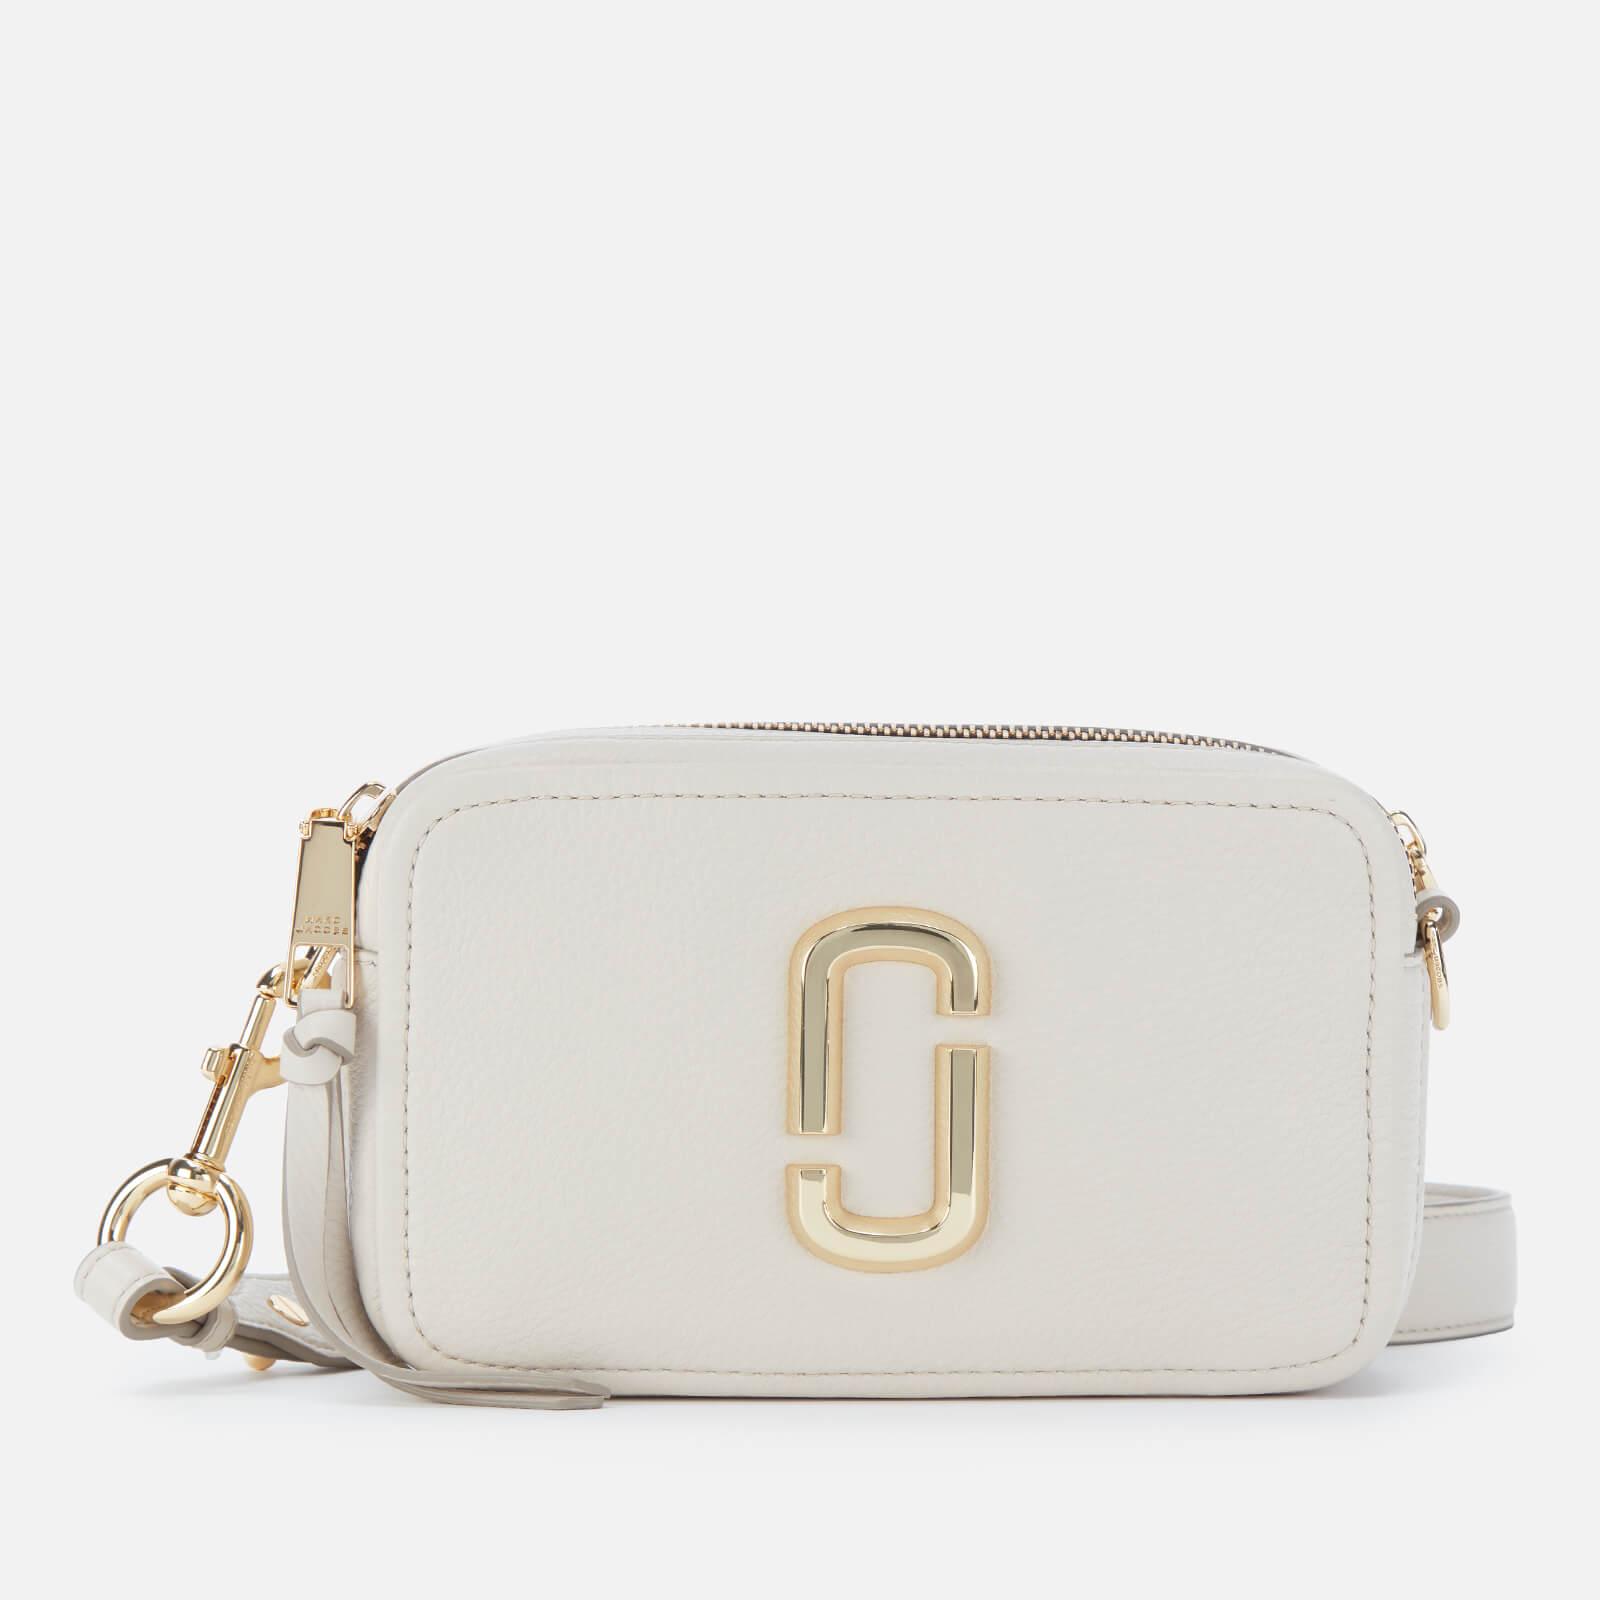 Marc Jacobs The Softshot 21 Bag In Beige Leather